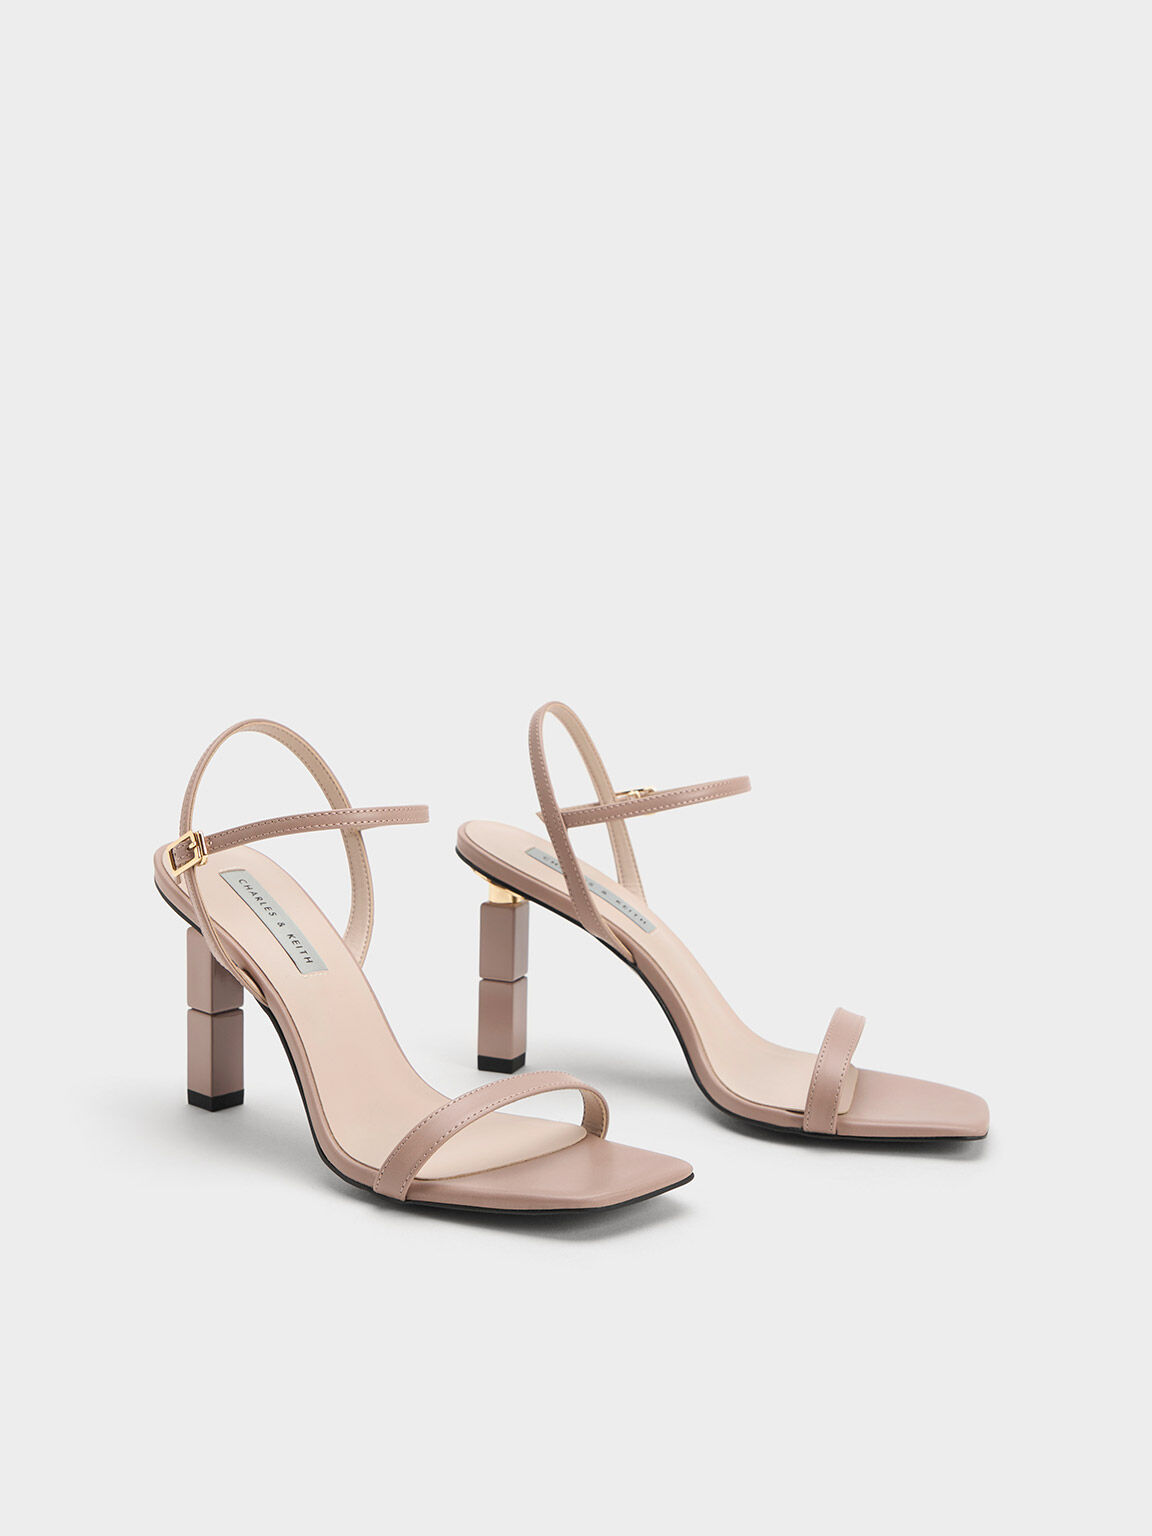 CHARLES & KEITH - Product featured: Block heel thong sandals | Facebook